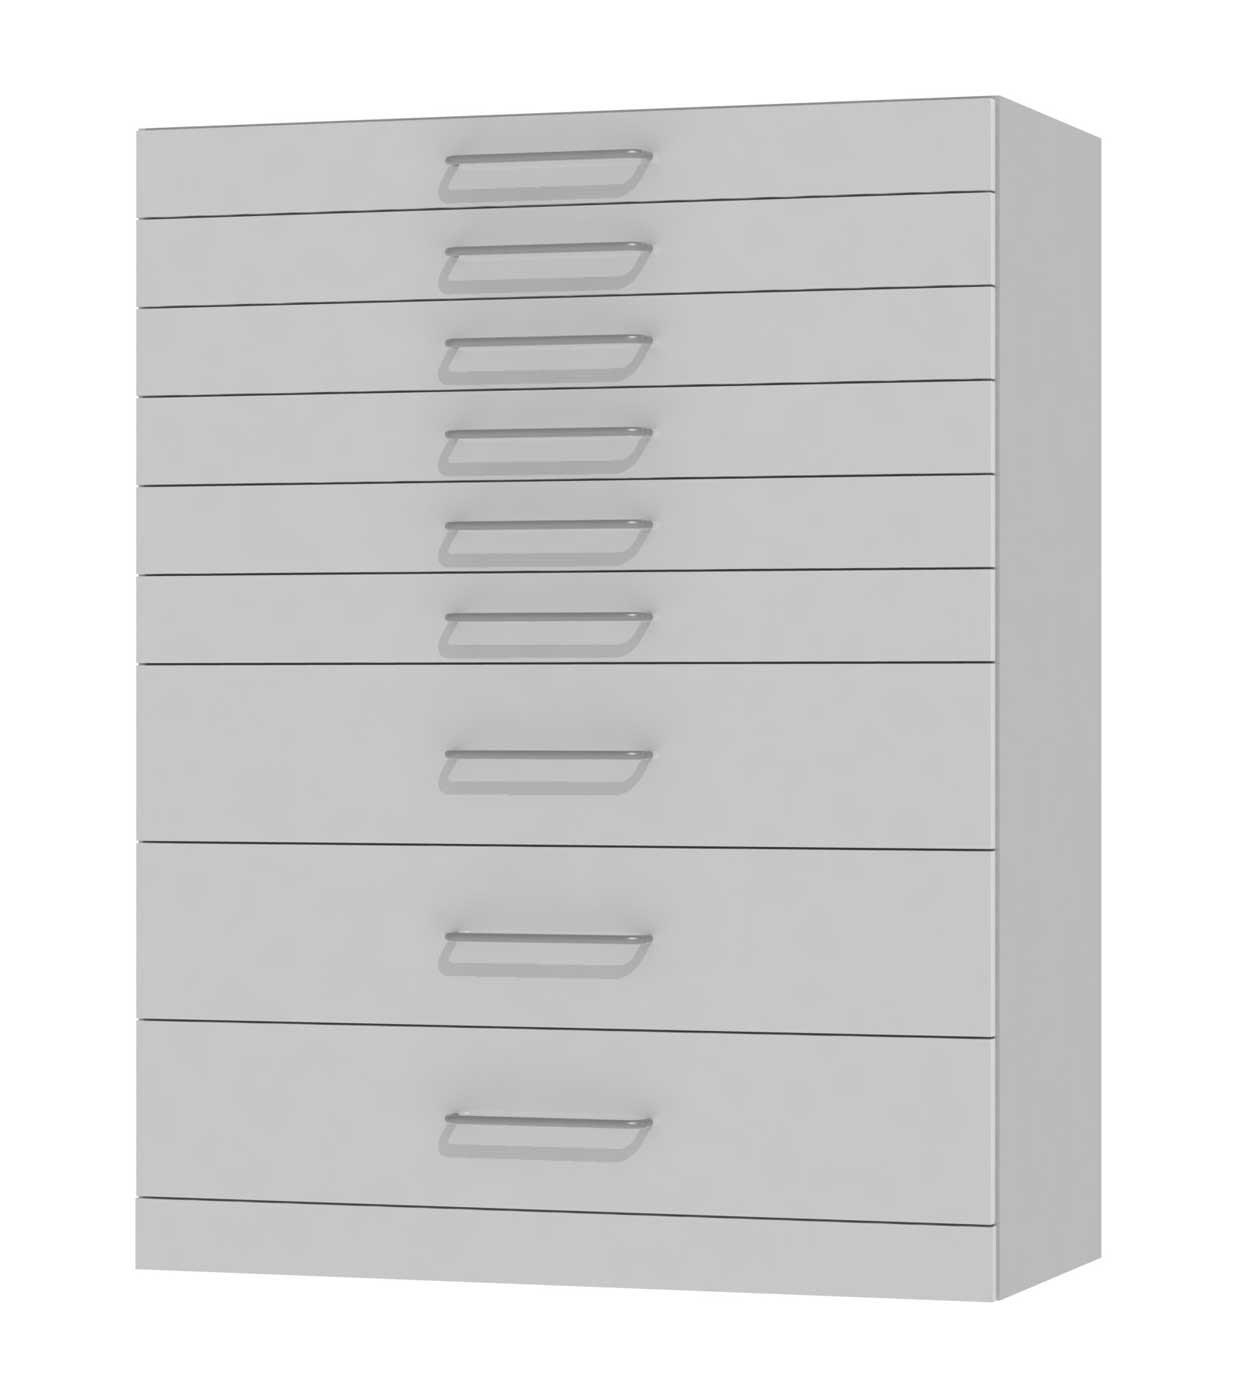 Drawer cabinet that can be used as a base cabinet